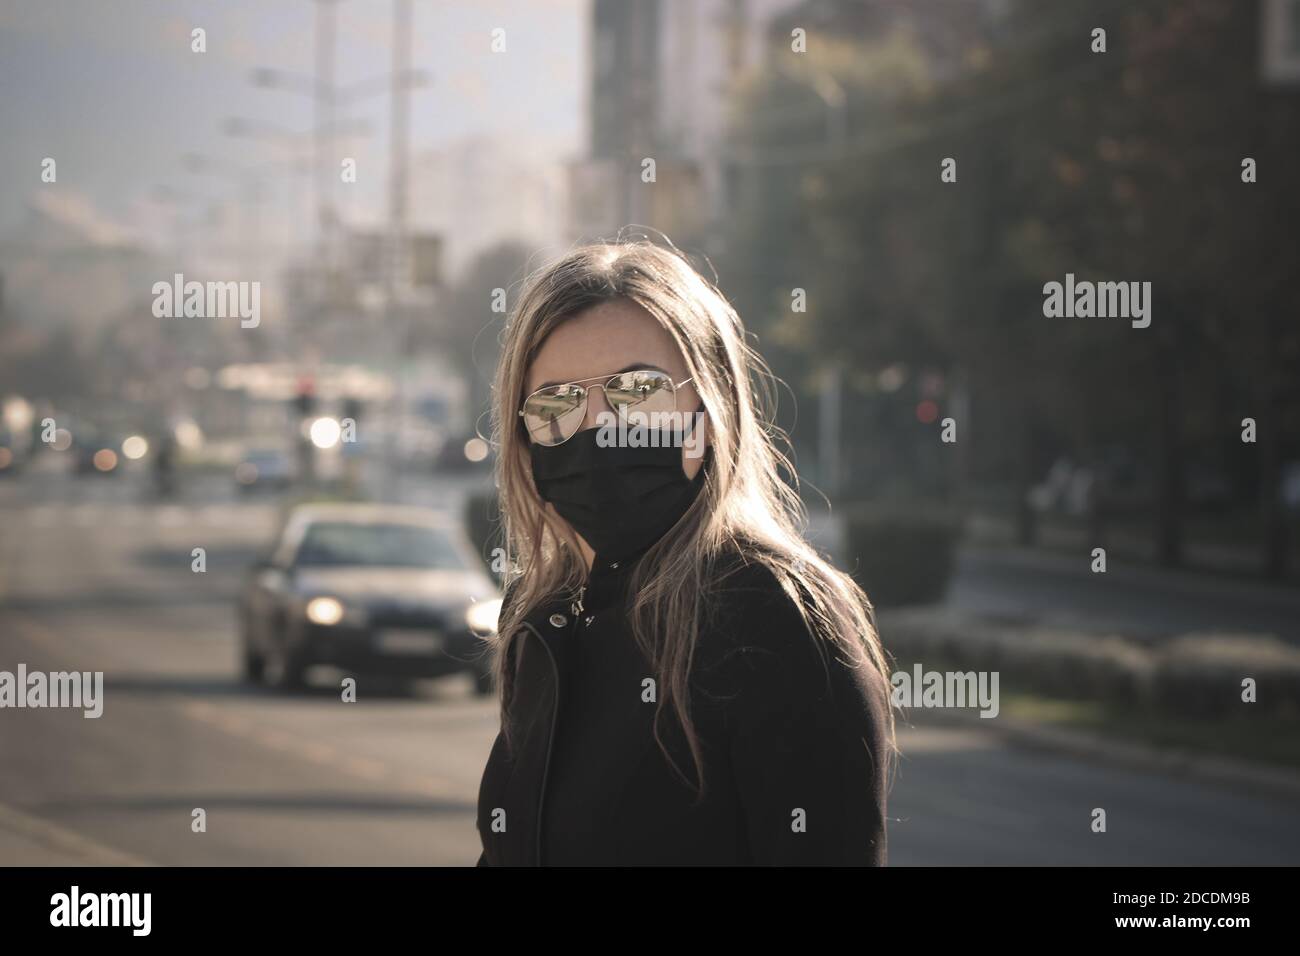 Alone woman in corona and pollution time Stock Photo